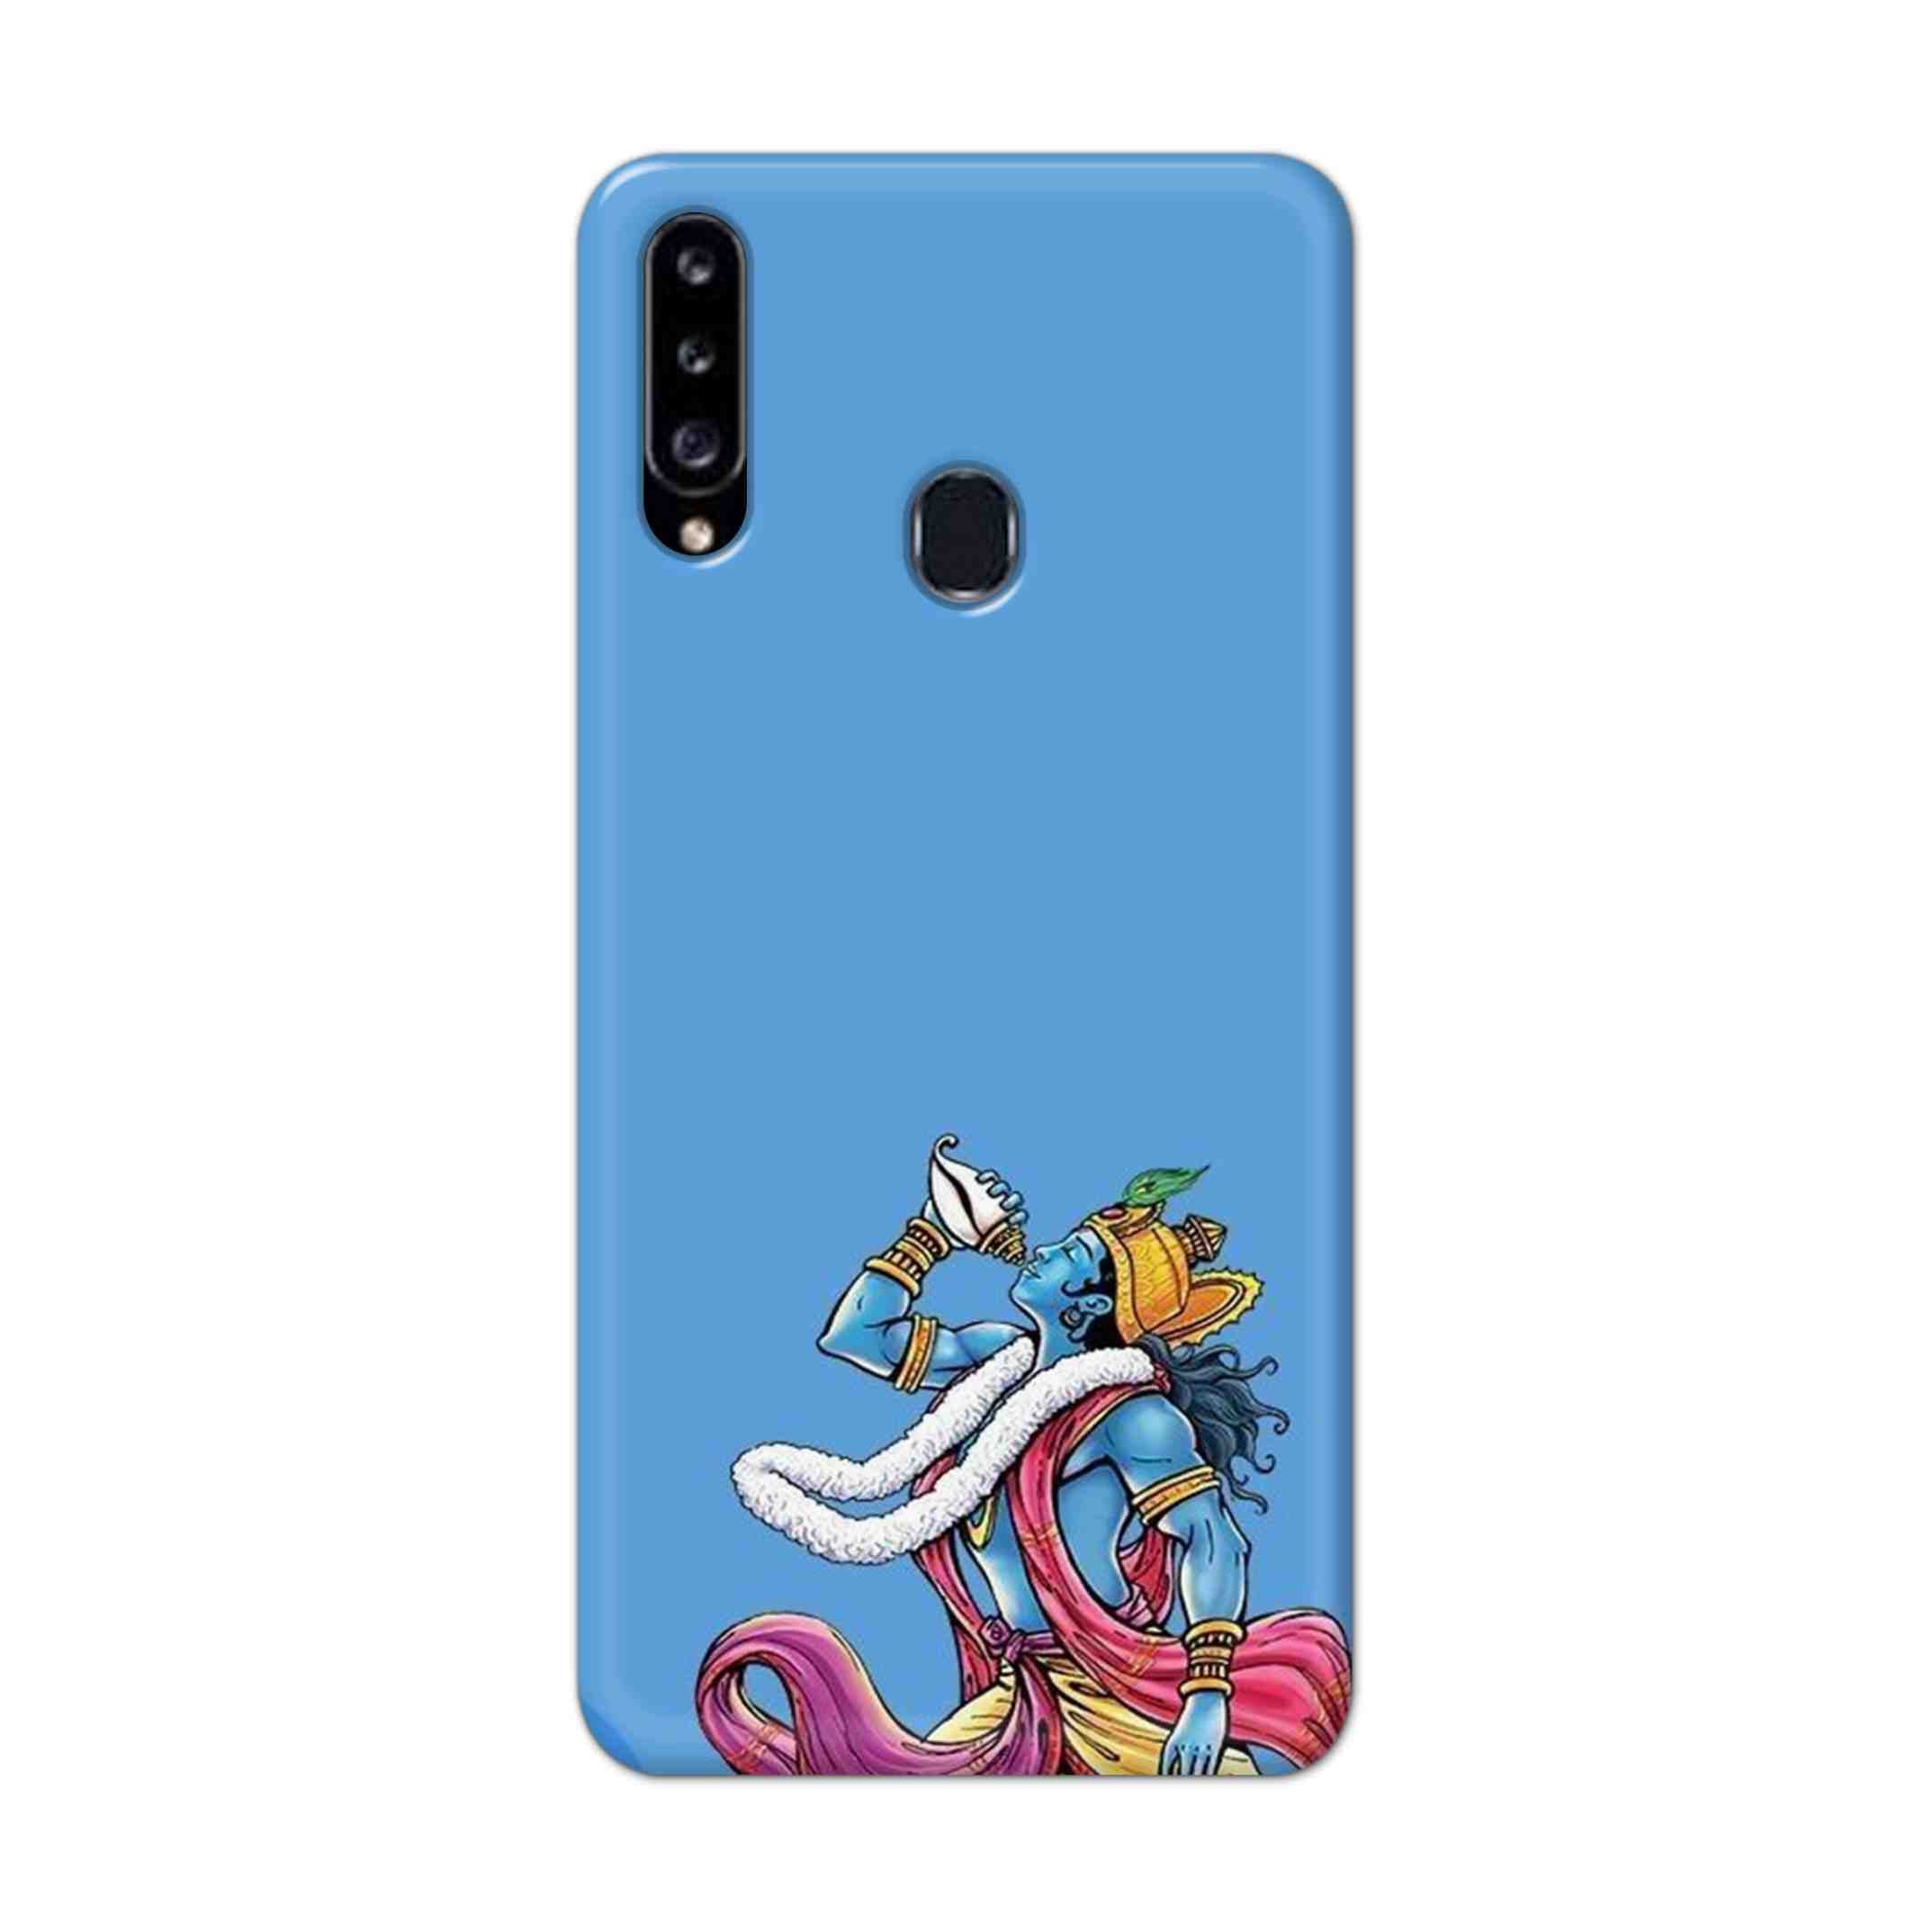 Buy Krishna Hard Back Mobile Phone Case Cover For Samsung Galaxy A21 Online